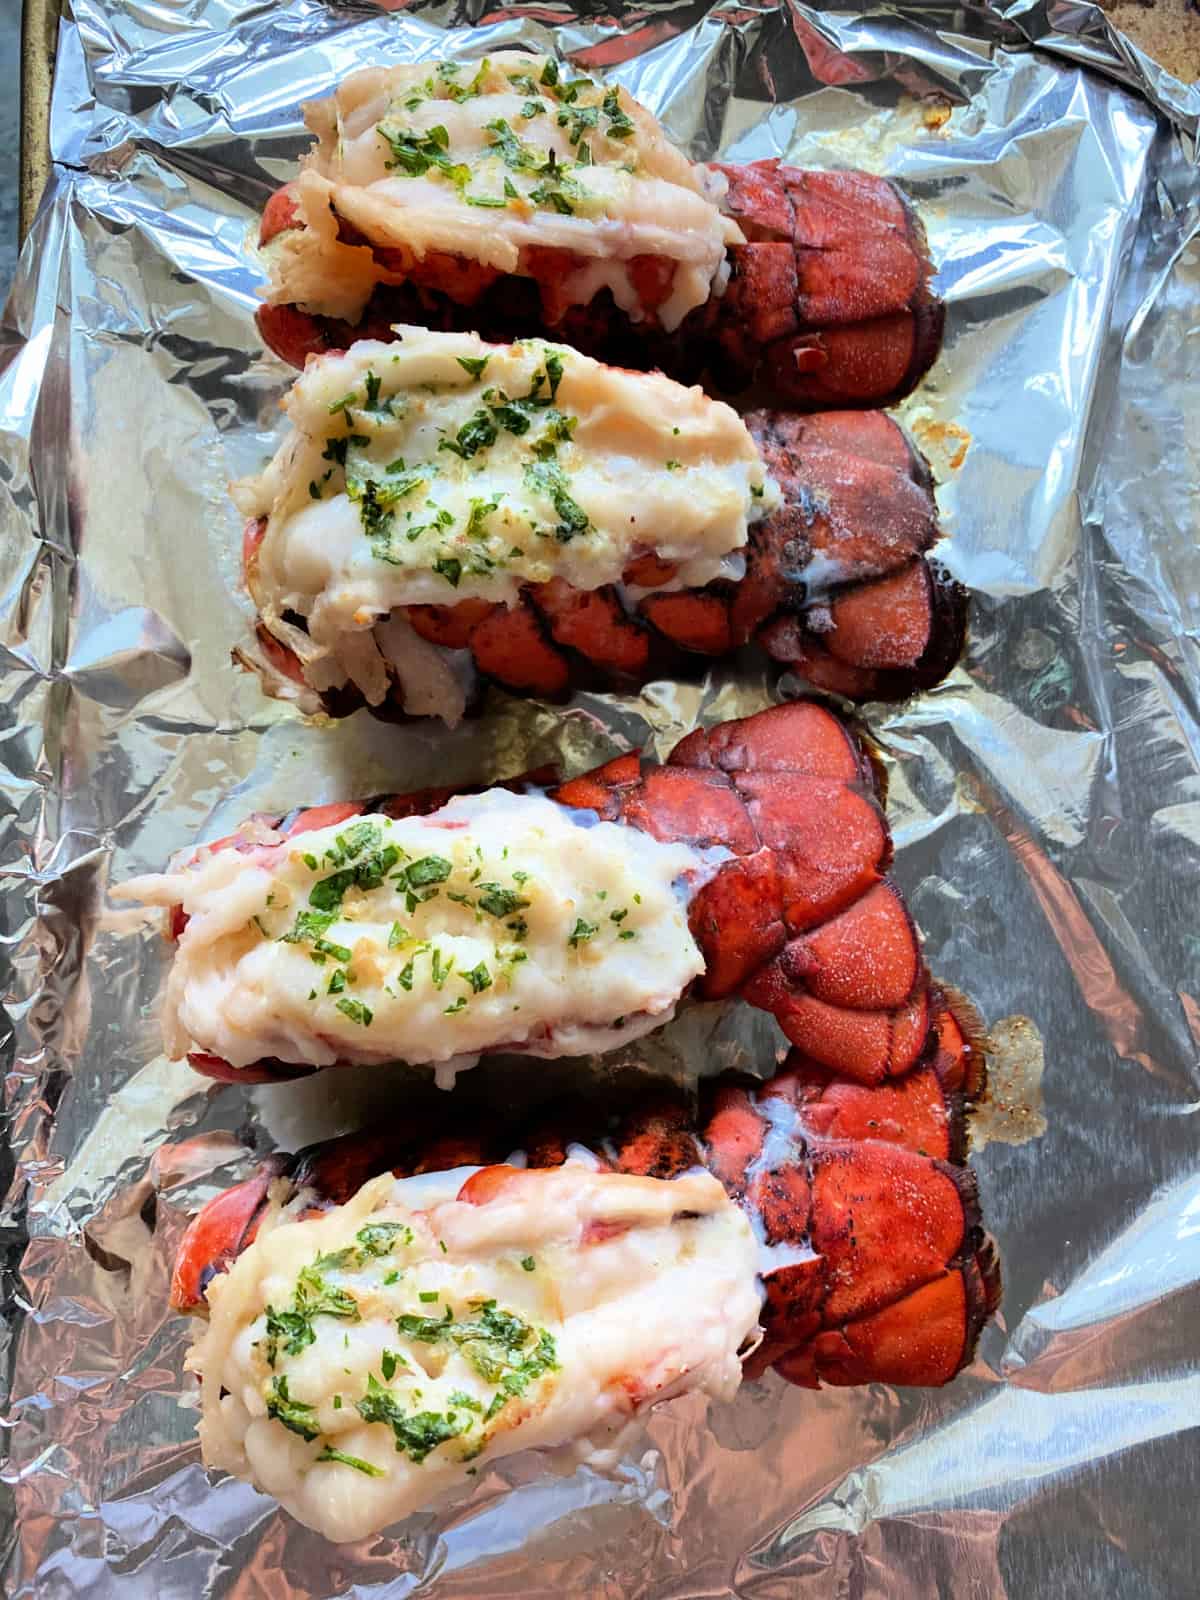 Four cooked lobster tails on an aluminum foil covered tray with herbs on top of the lobster meat.